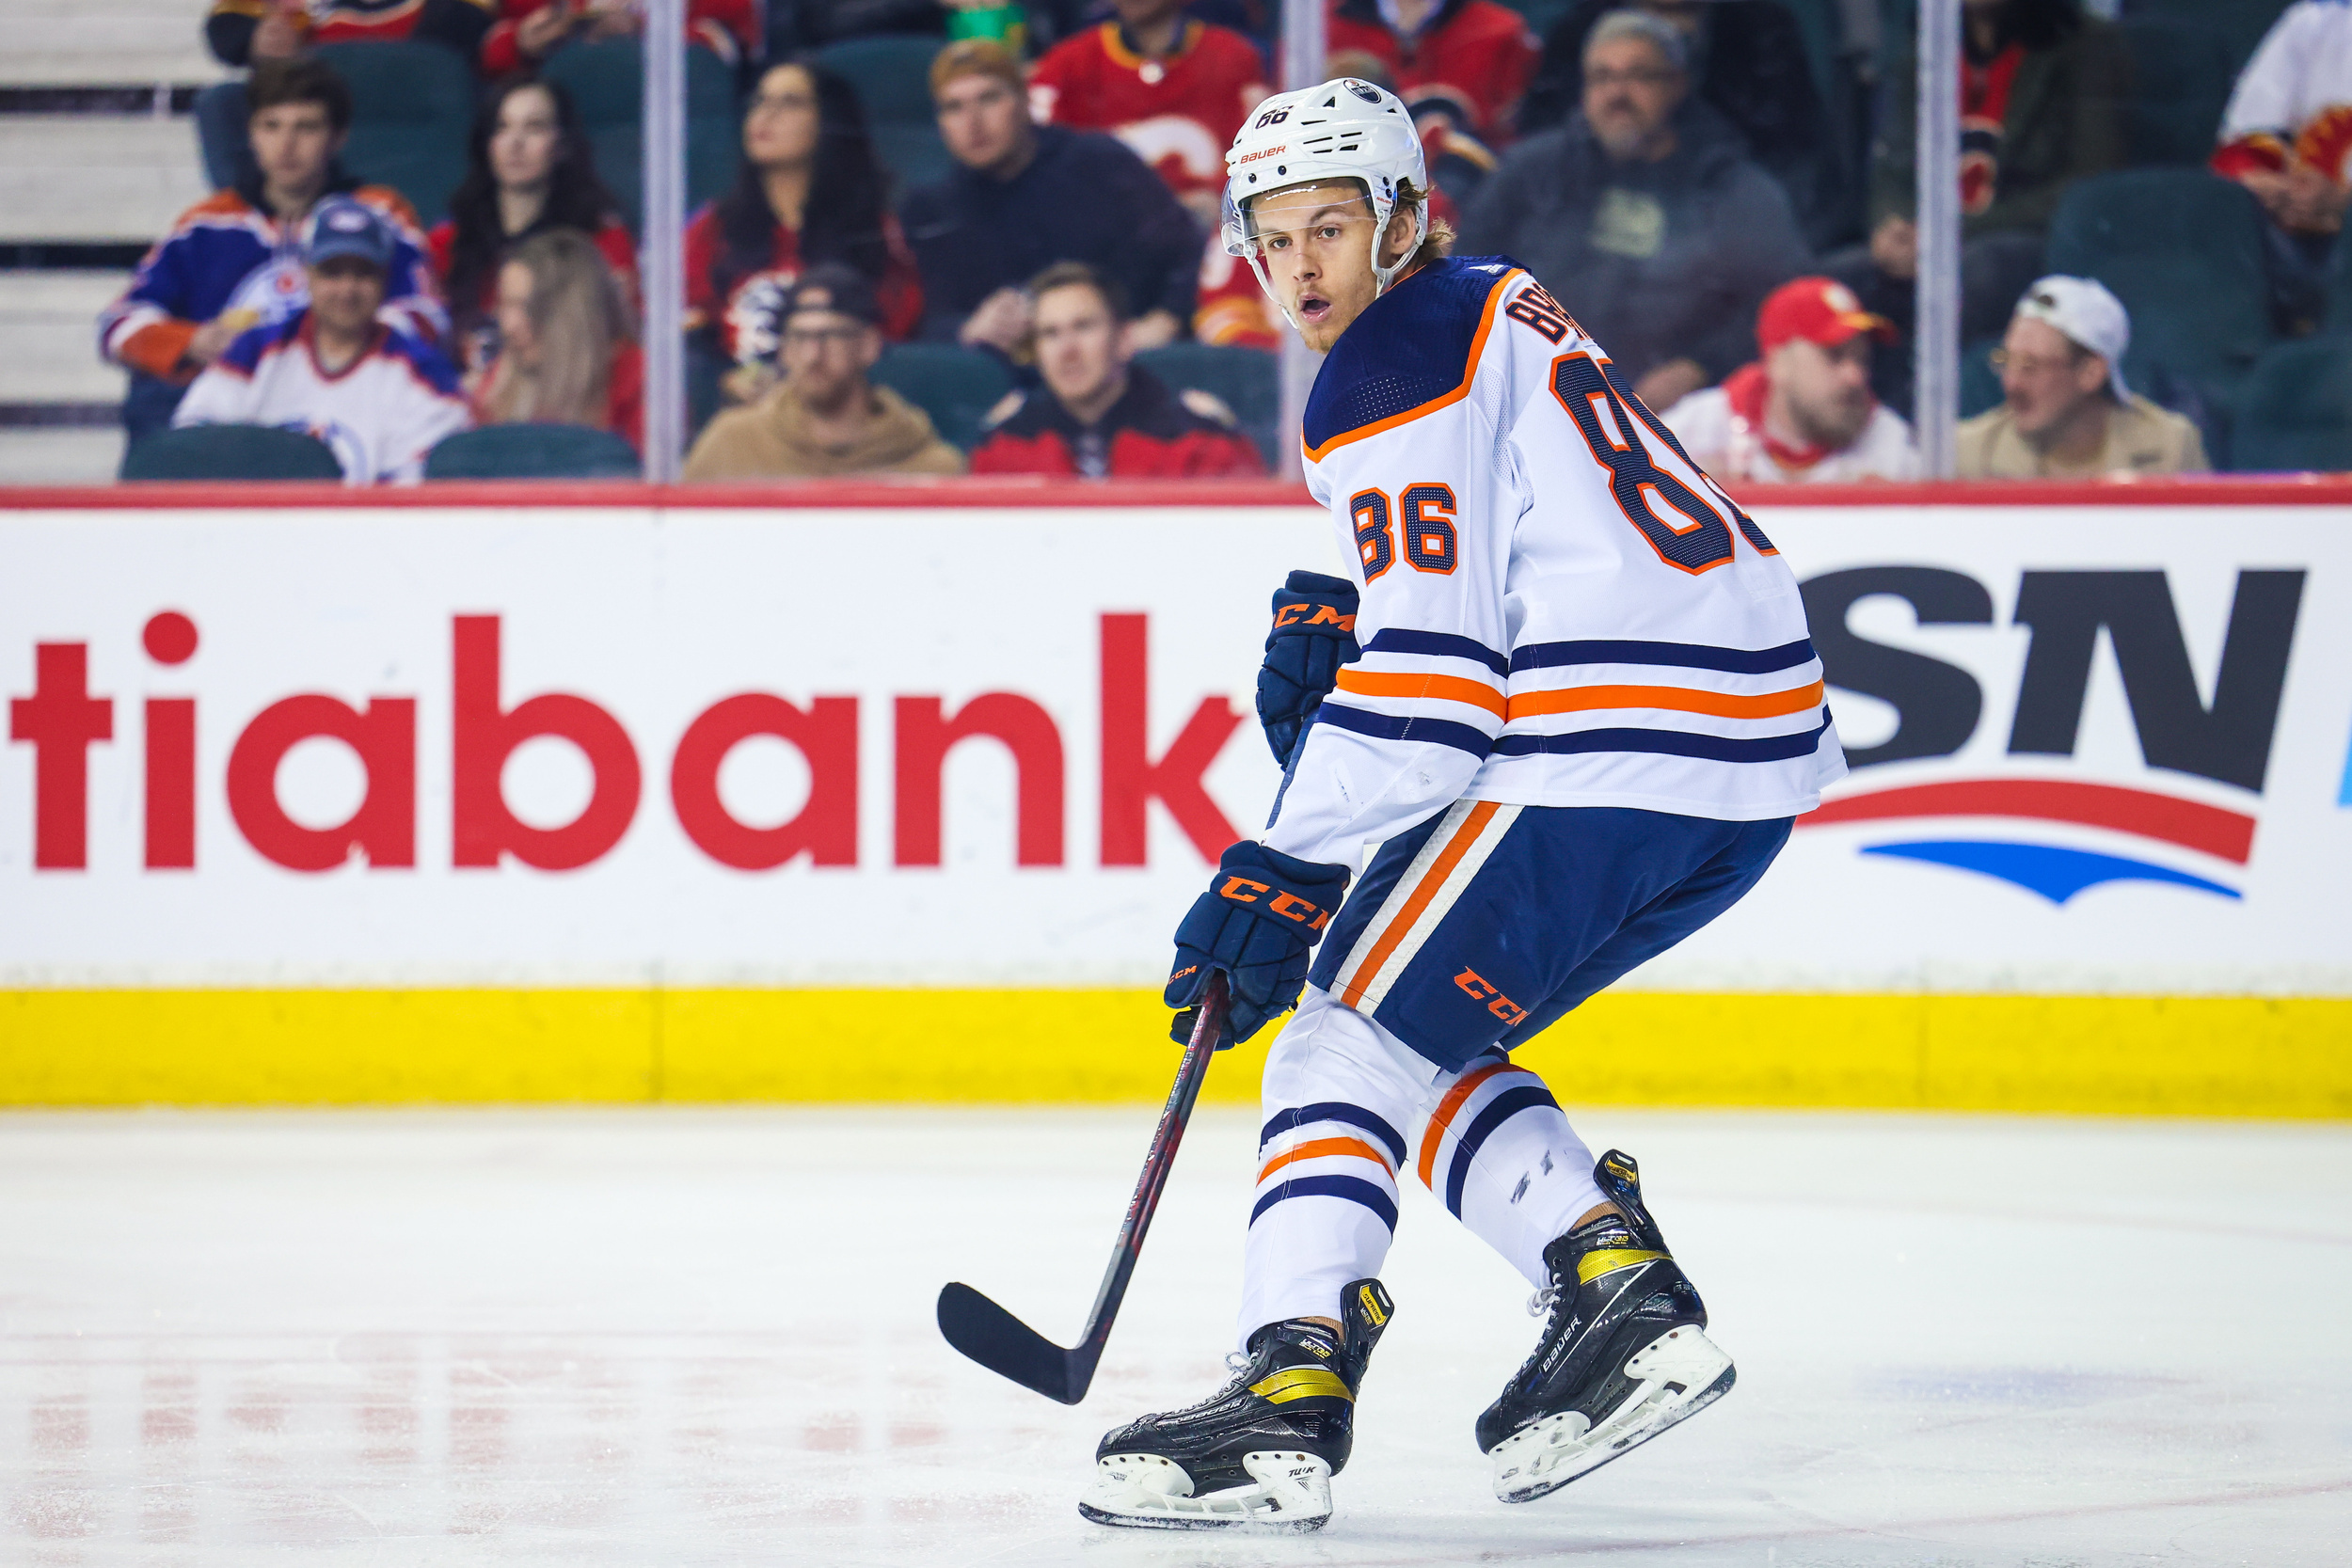 oilers loan former first-round pick to ahl amid trade rumors